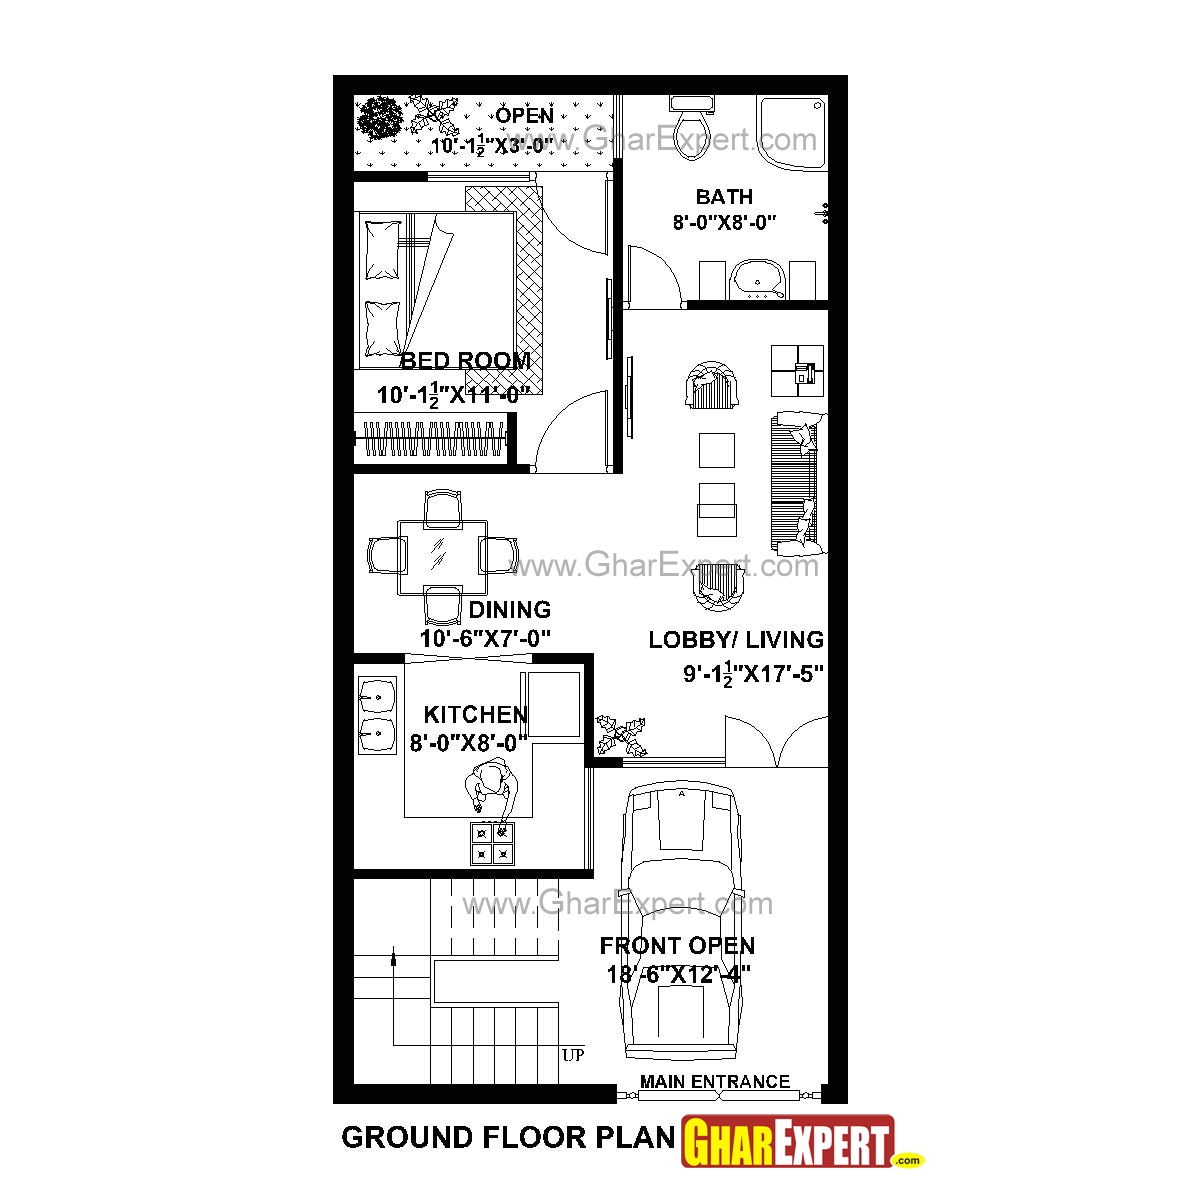 20×40 House Plan 2bhk Image Result for 20×40 House Plan Projects to Try Pinterest